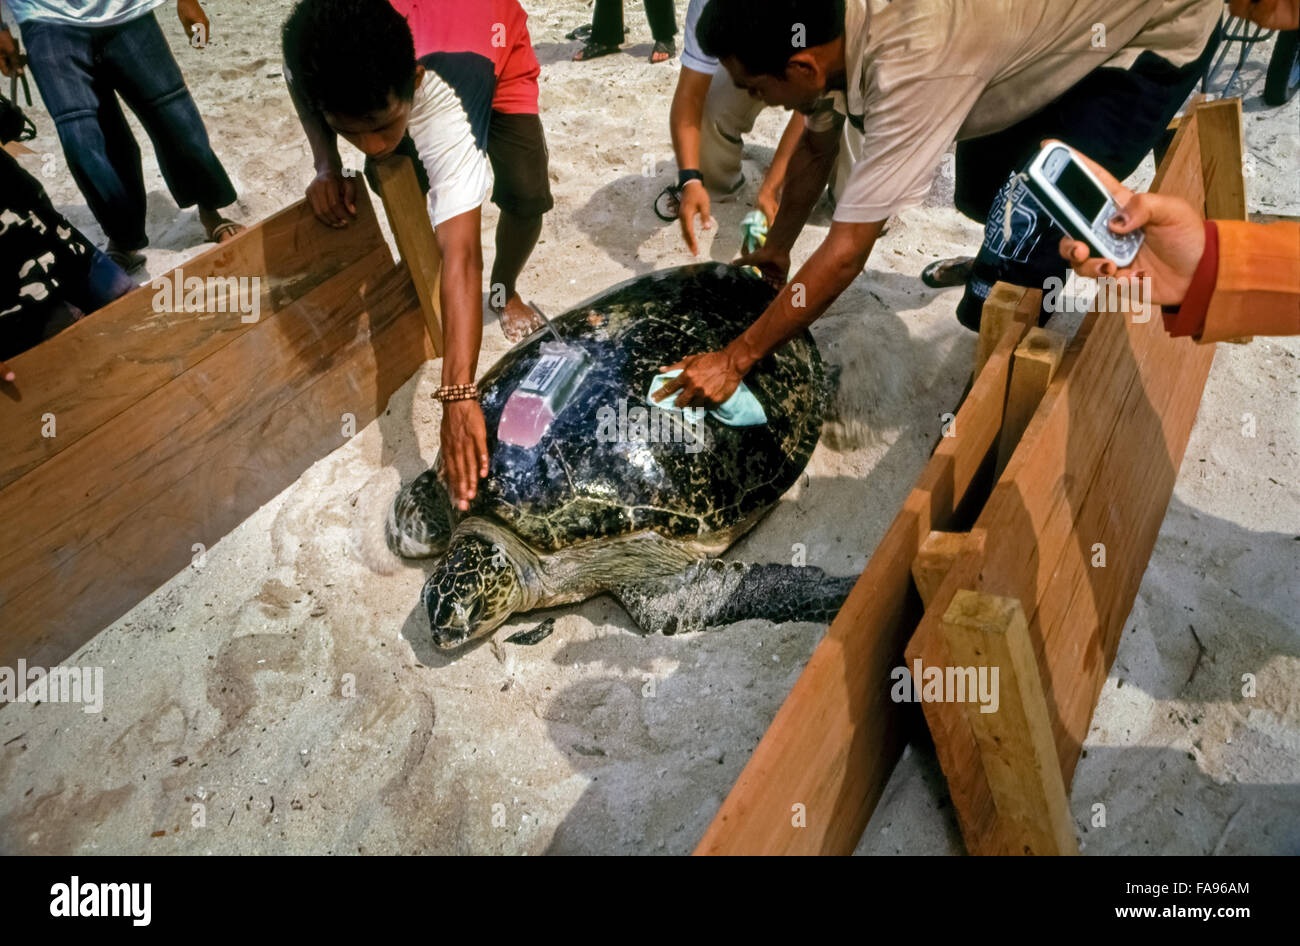 Conservationists taking care of a green turtle with transmitter on its shell. Stock Photo